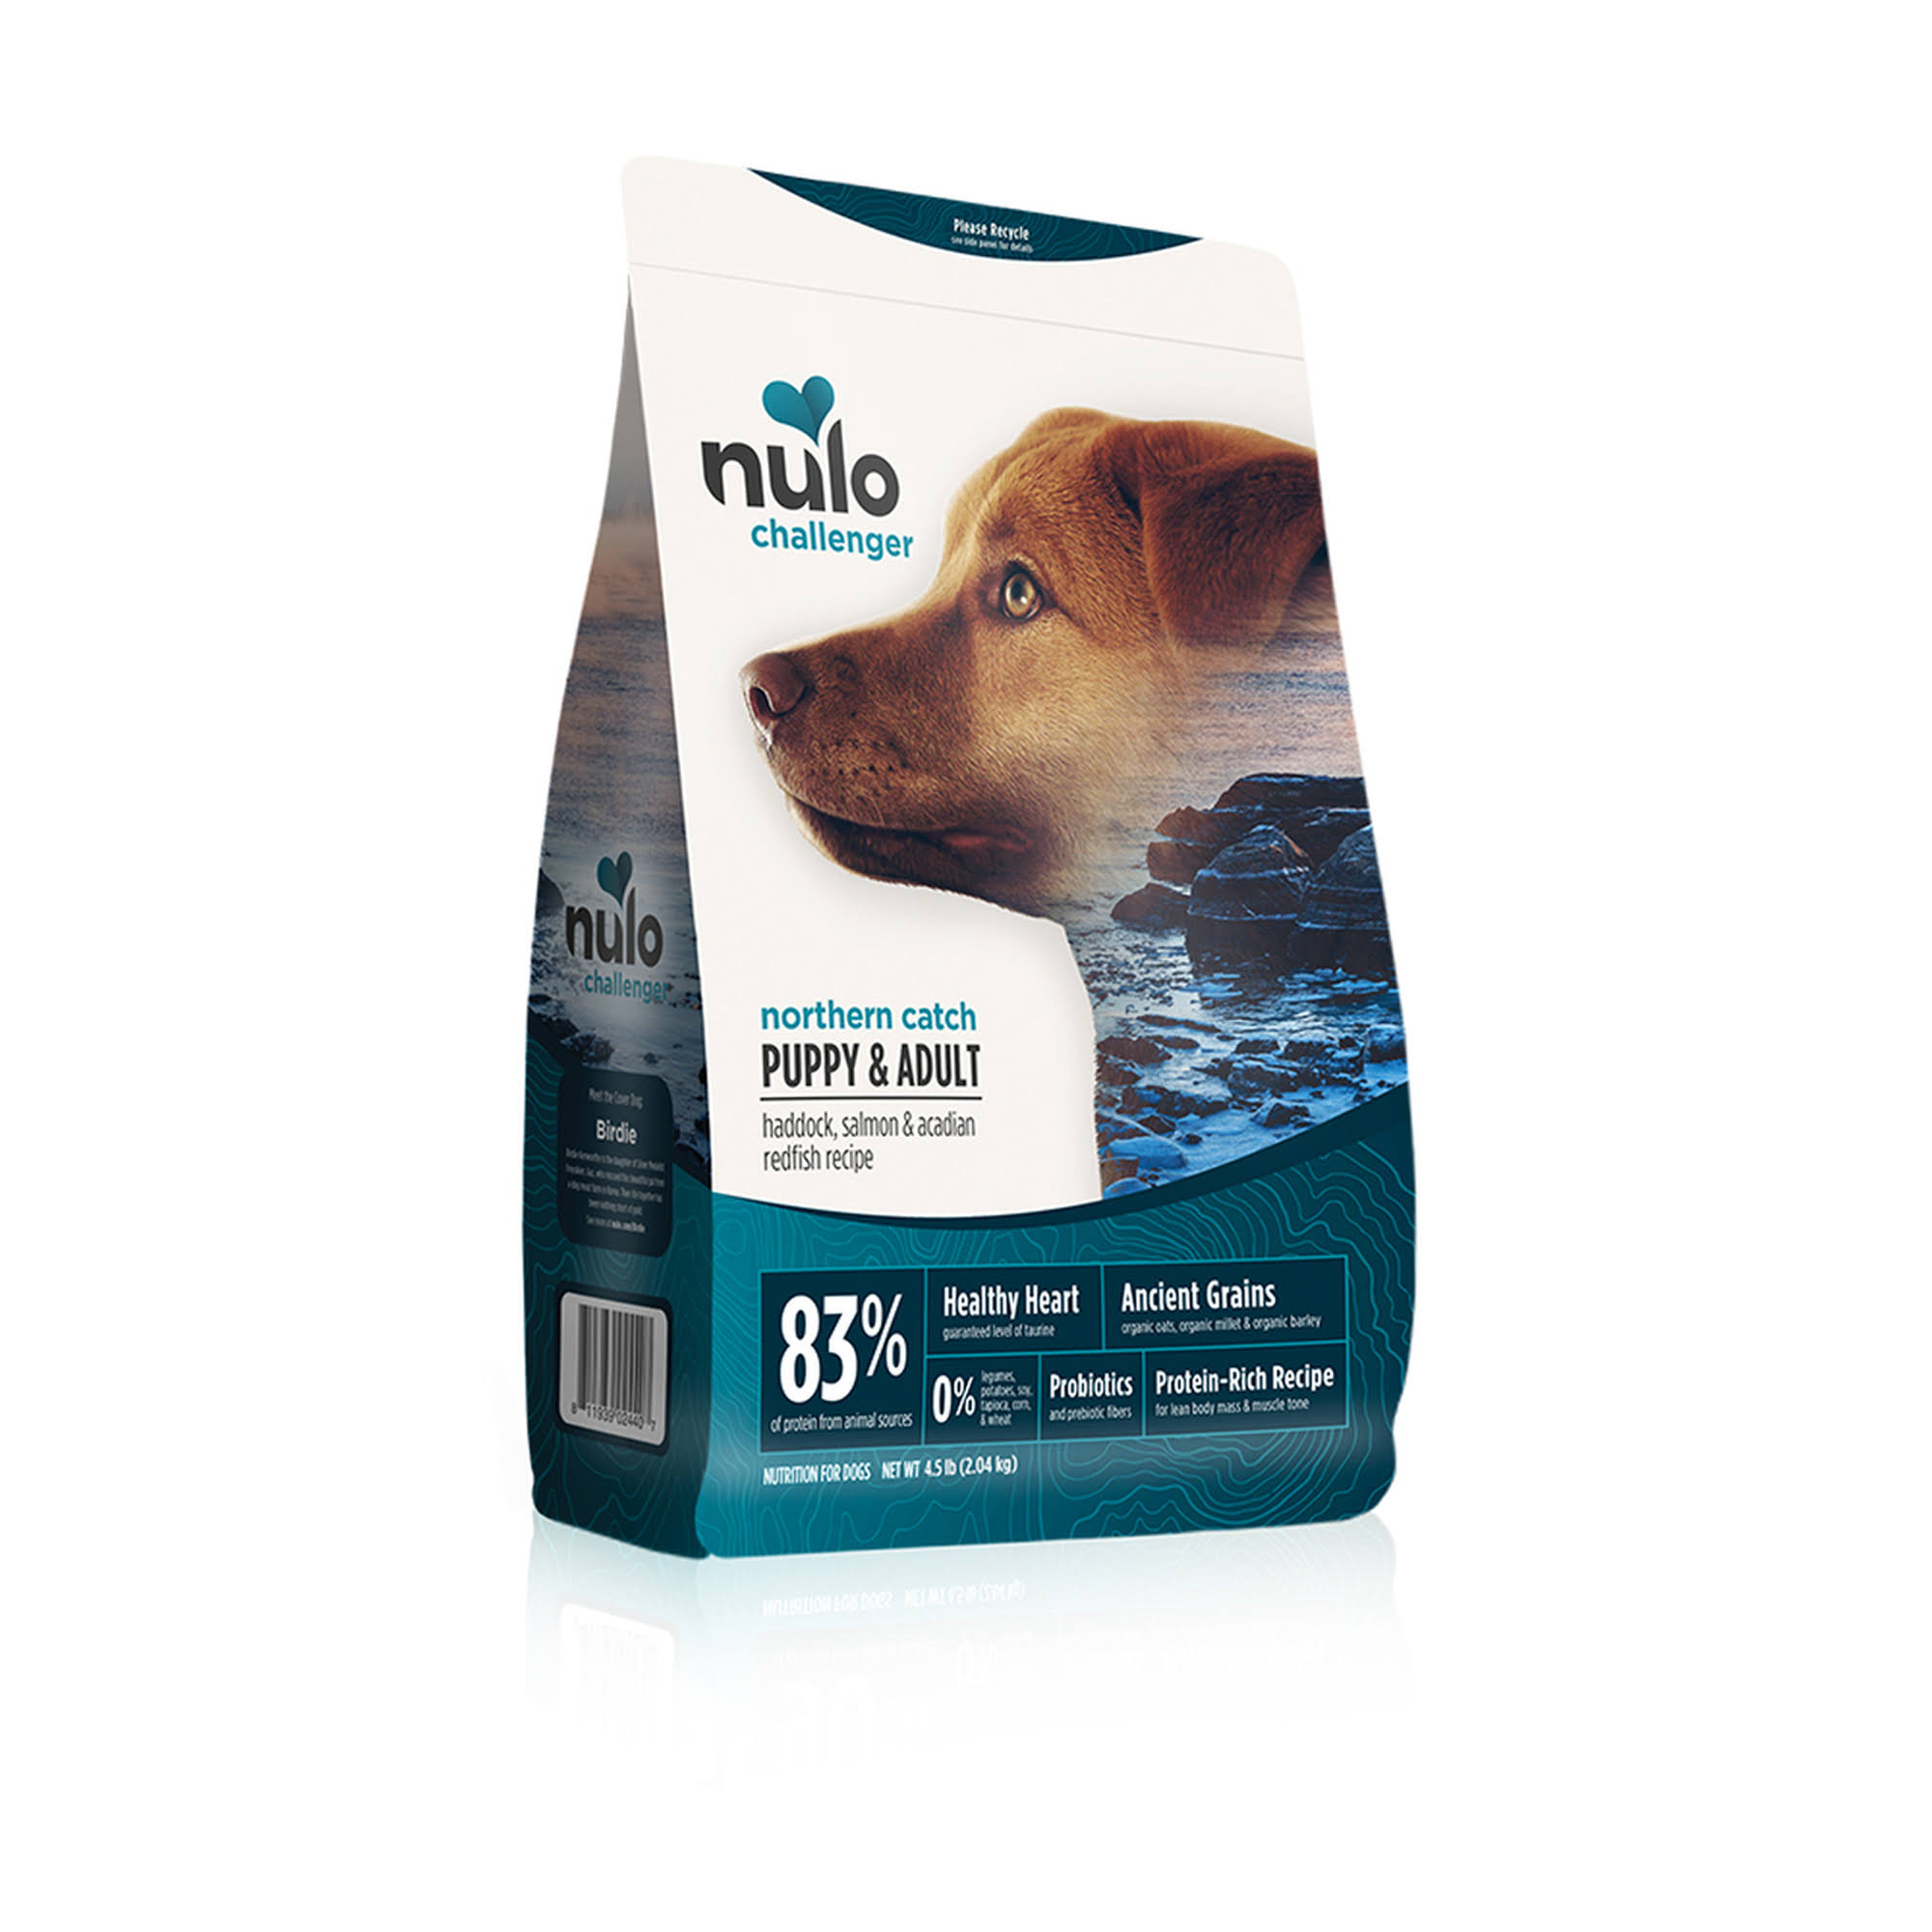 Nulo Challenger Northern Catch Haddock Salmon & Redfish Small Breed Dog Food 4.5 lbs